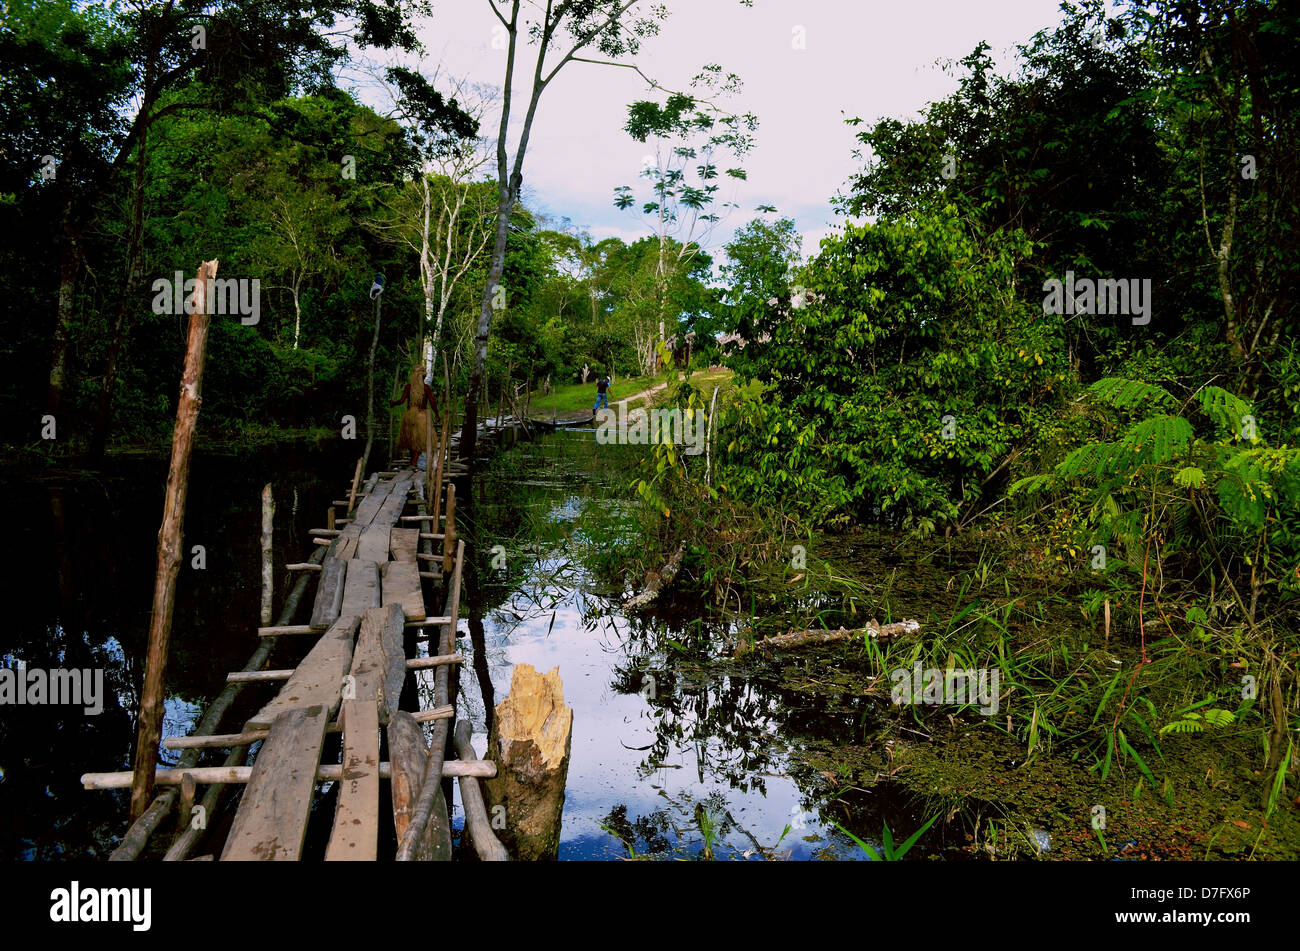 a member of the Yagua indigenous tribe crosses a bridge in the Amazon rain forest, Peru Stock Photo